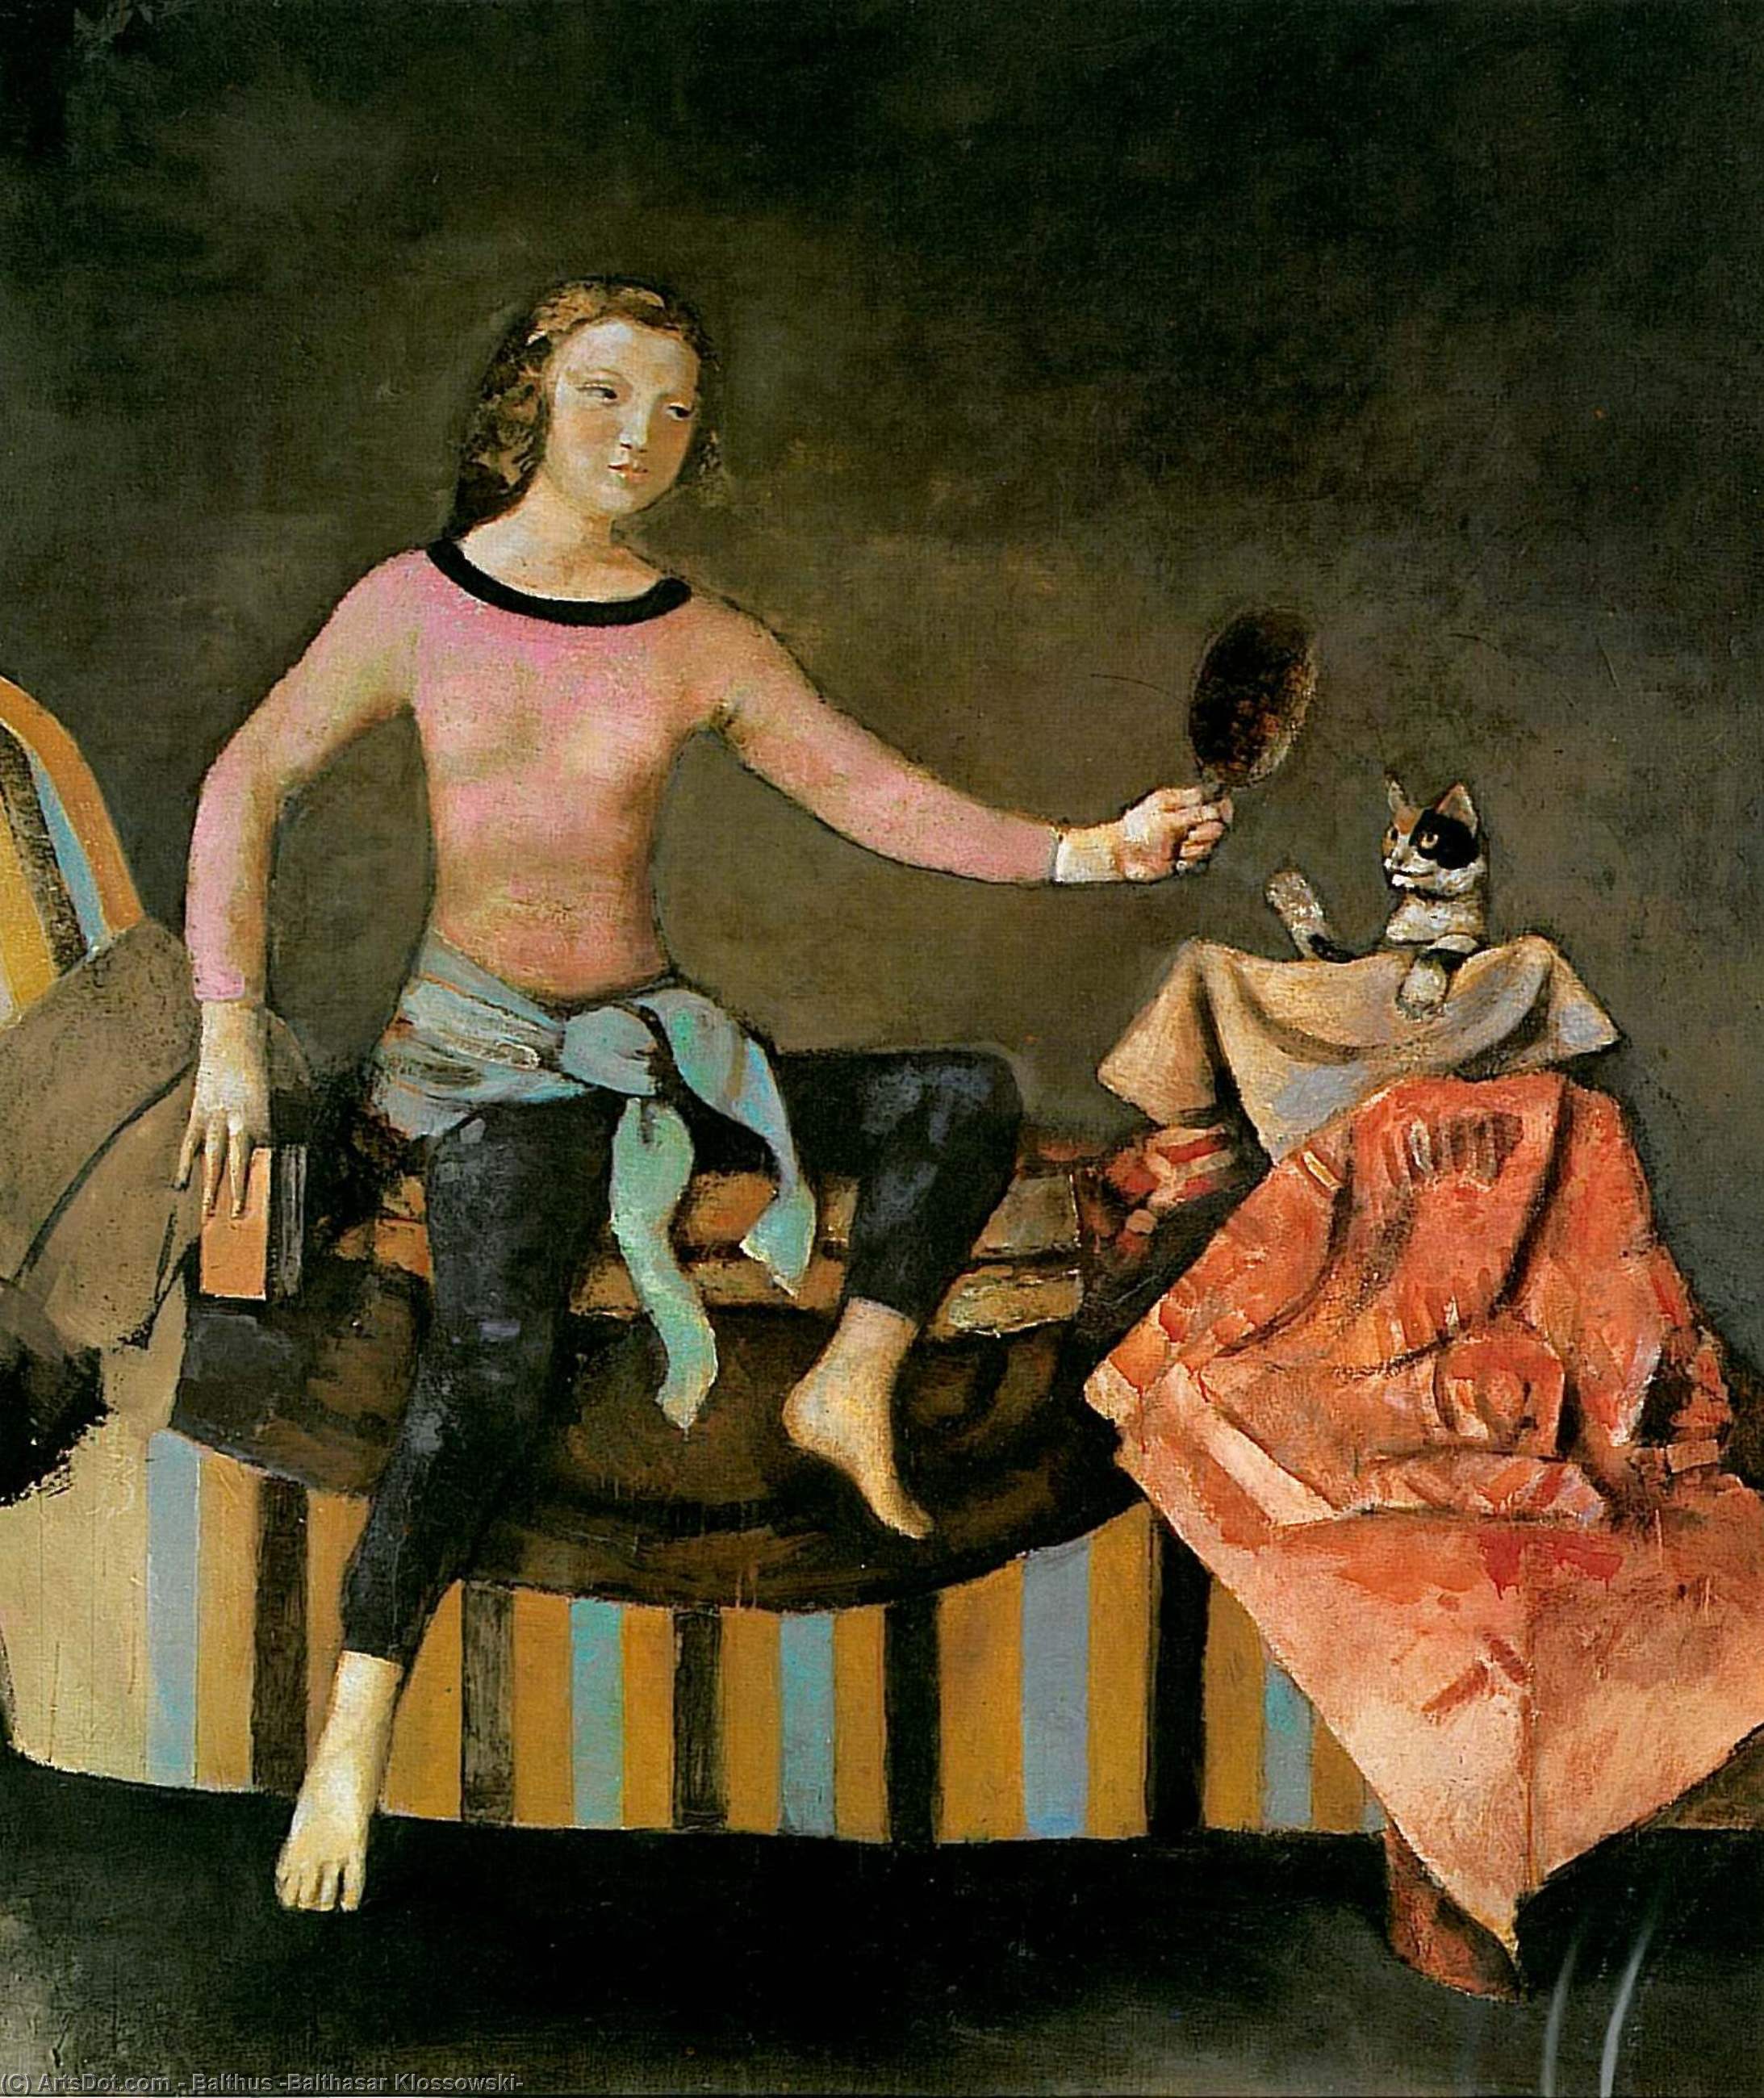 The Cat in the Mirror, 1988 by Balthus (Balthasar Klossowski) (1908-2001, France) Balthus (Balthasar Klossowski) | ArtsDot.com